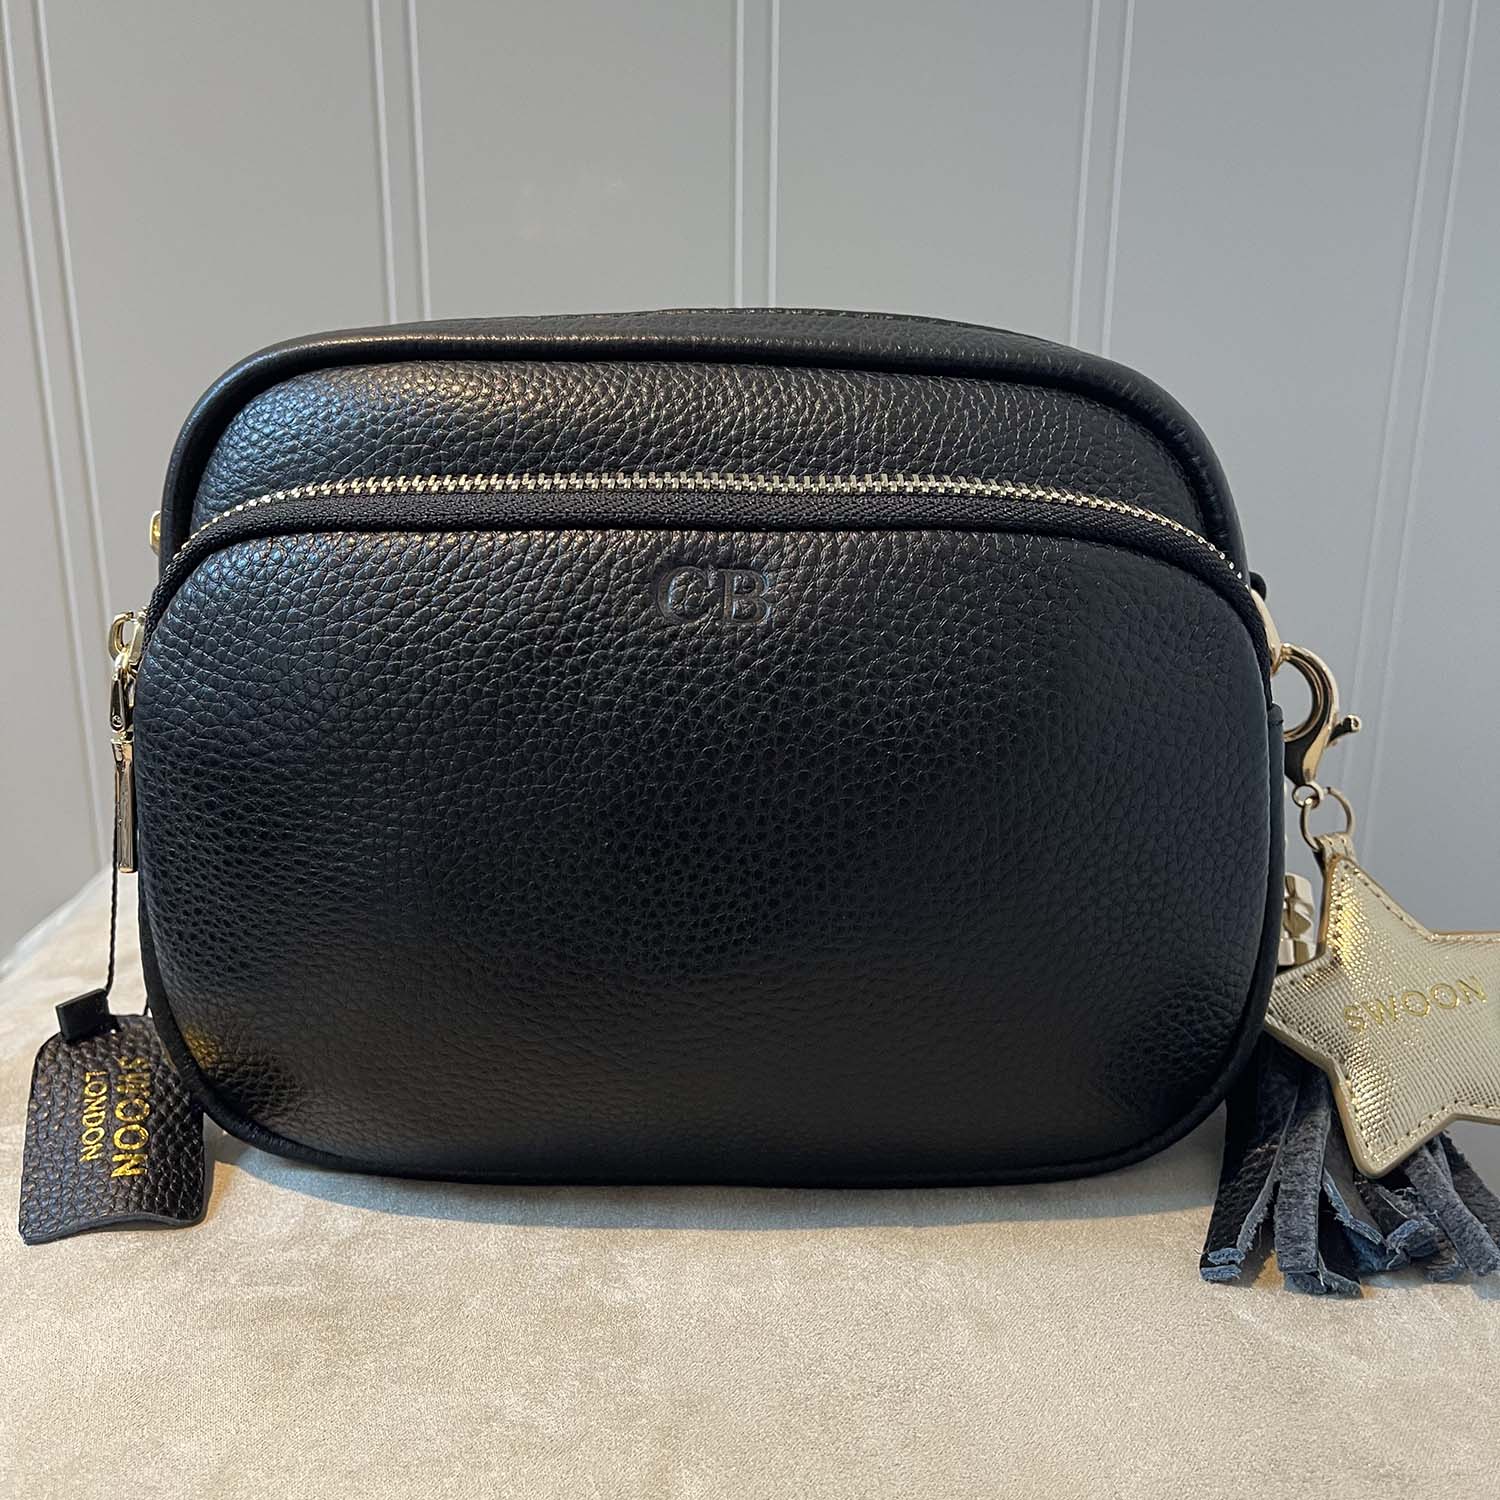 Personalised Downton bag in Midnight Black by Swoon London